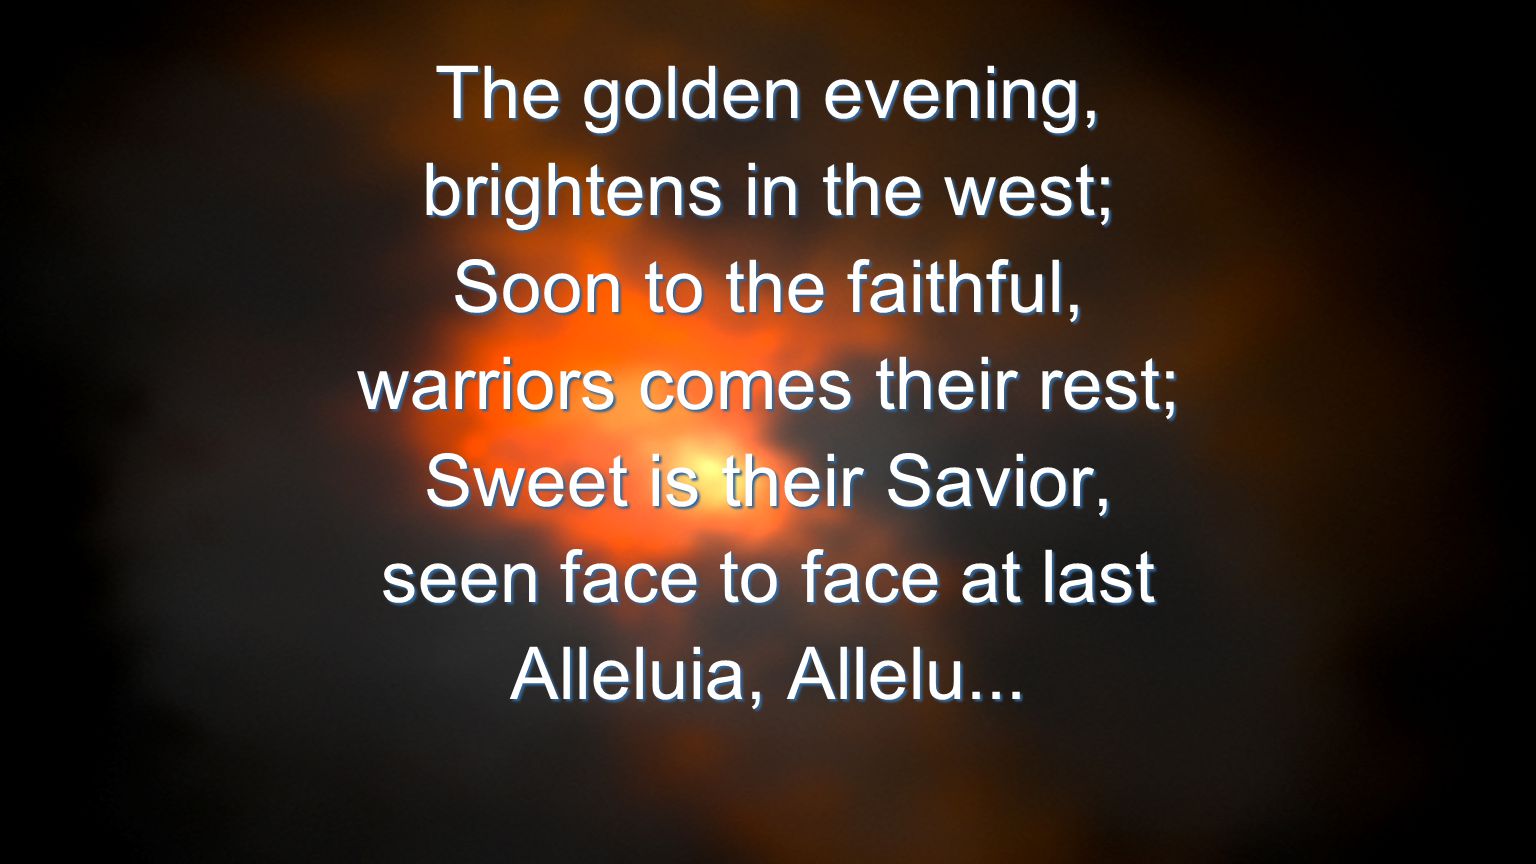 The golden evening, brightens in the west; Soon to the faithful, warriors comes their rest; Sweet is their Savior, seen face to face at last Alleluia, Allelu...